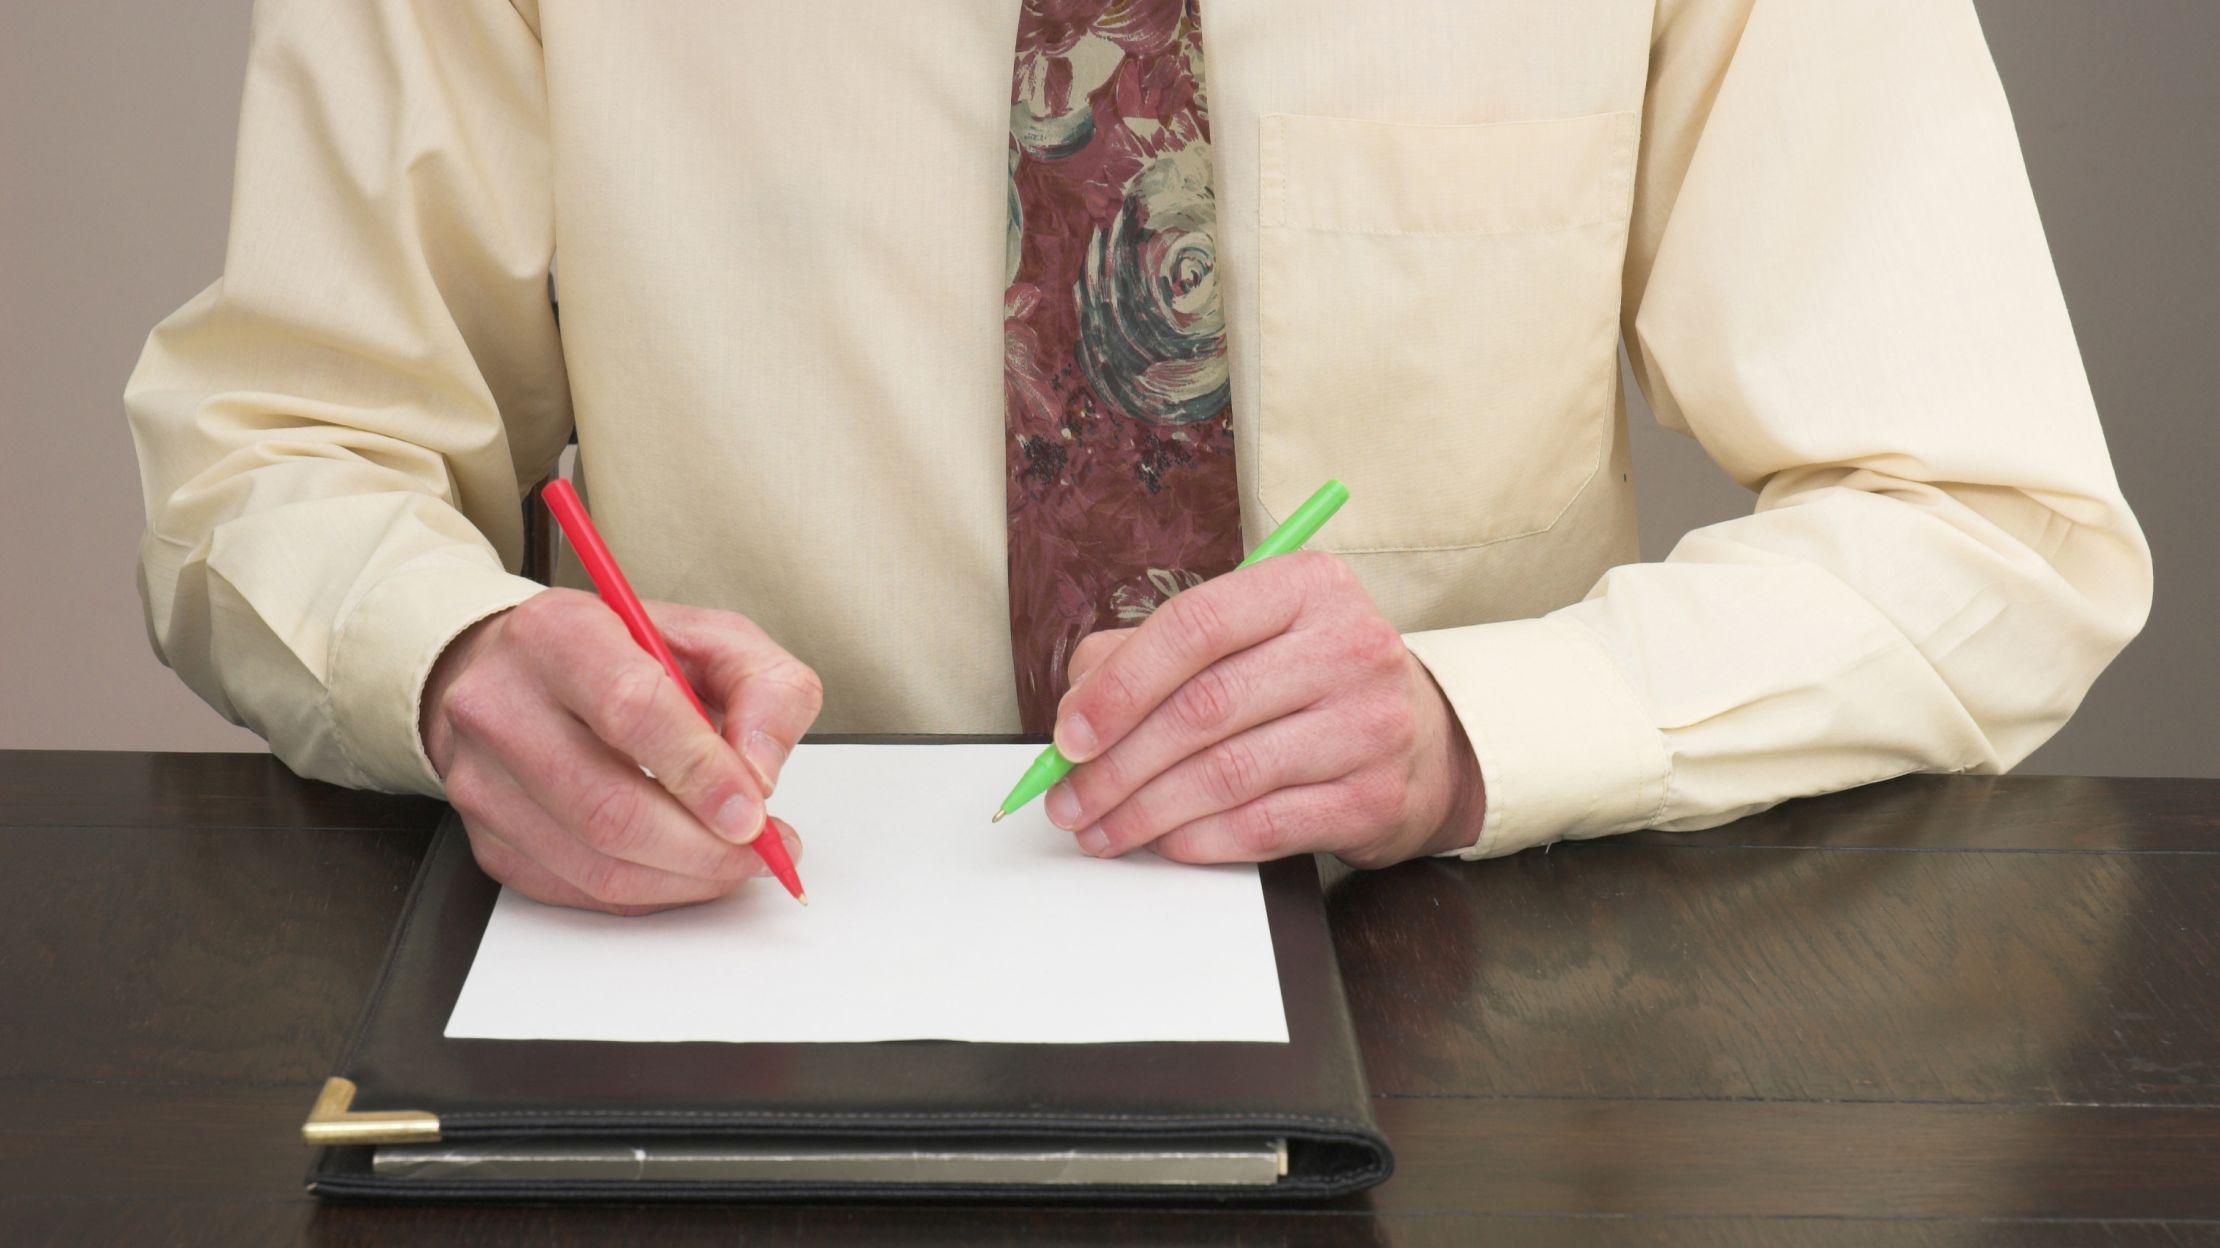 11 Facts About the Ambidextrous | Mental Floss